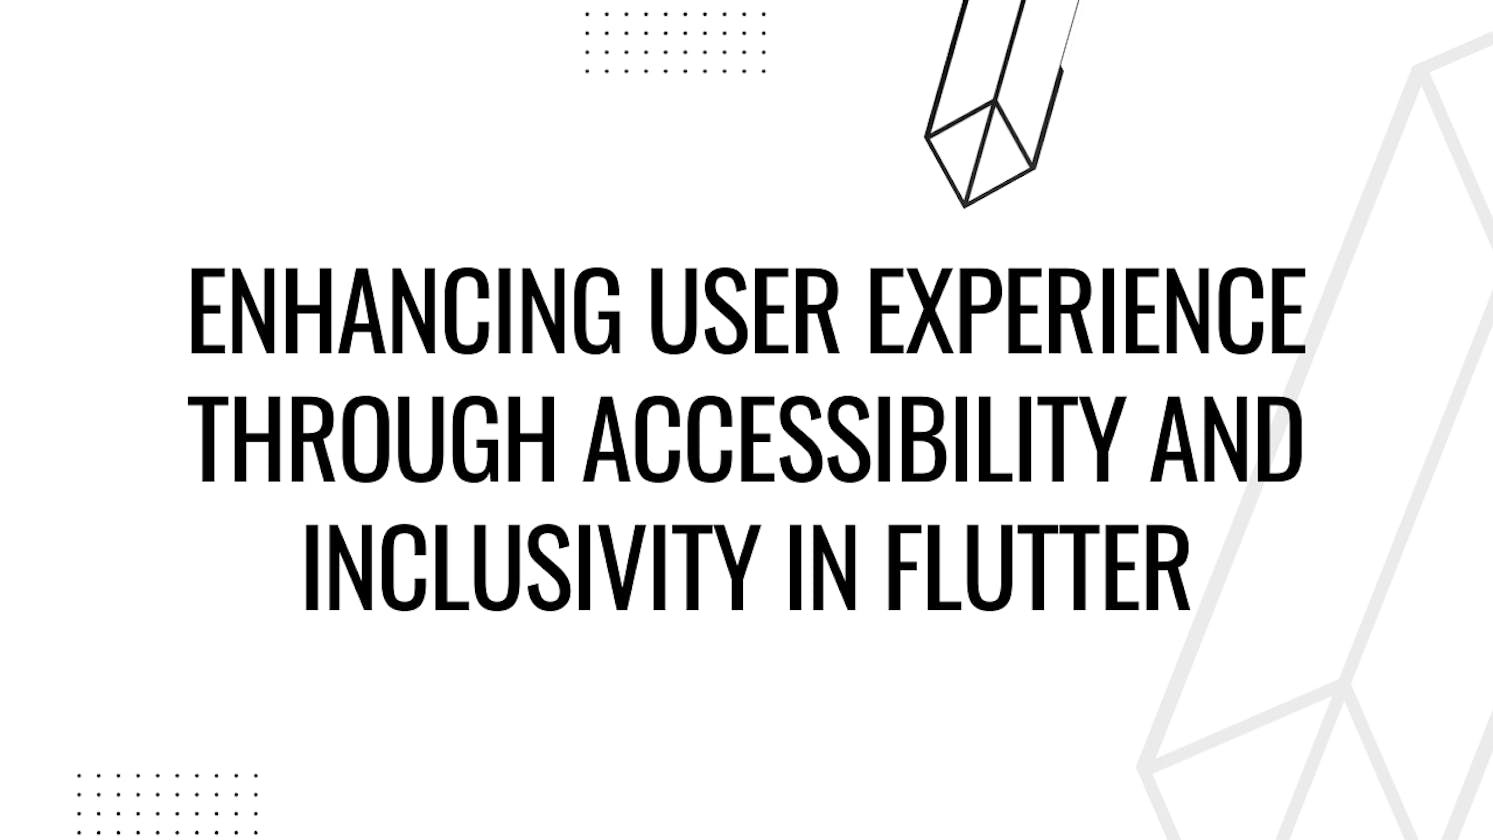 Enhancing User Experience Through Accessibility and Inclusivity in Flutter